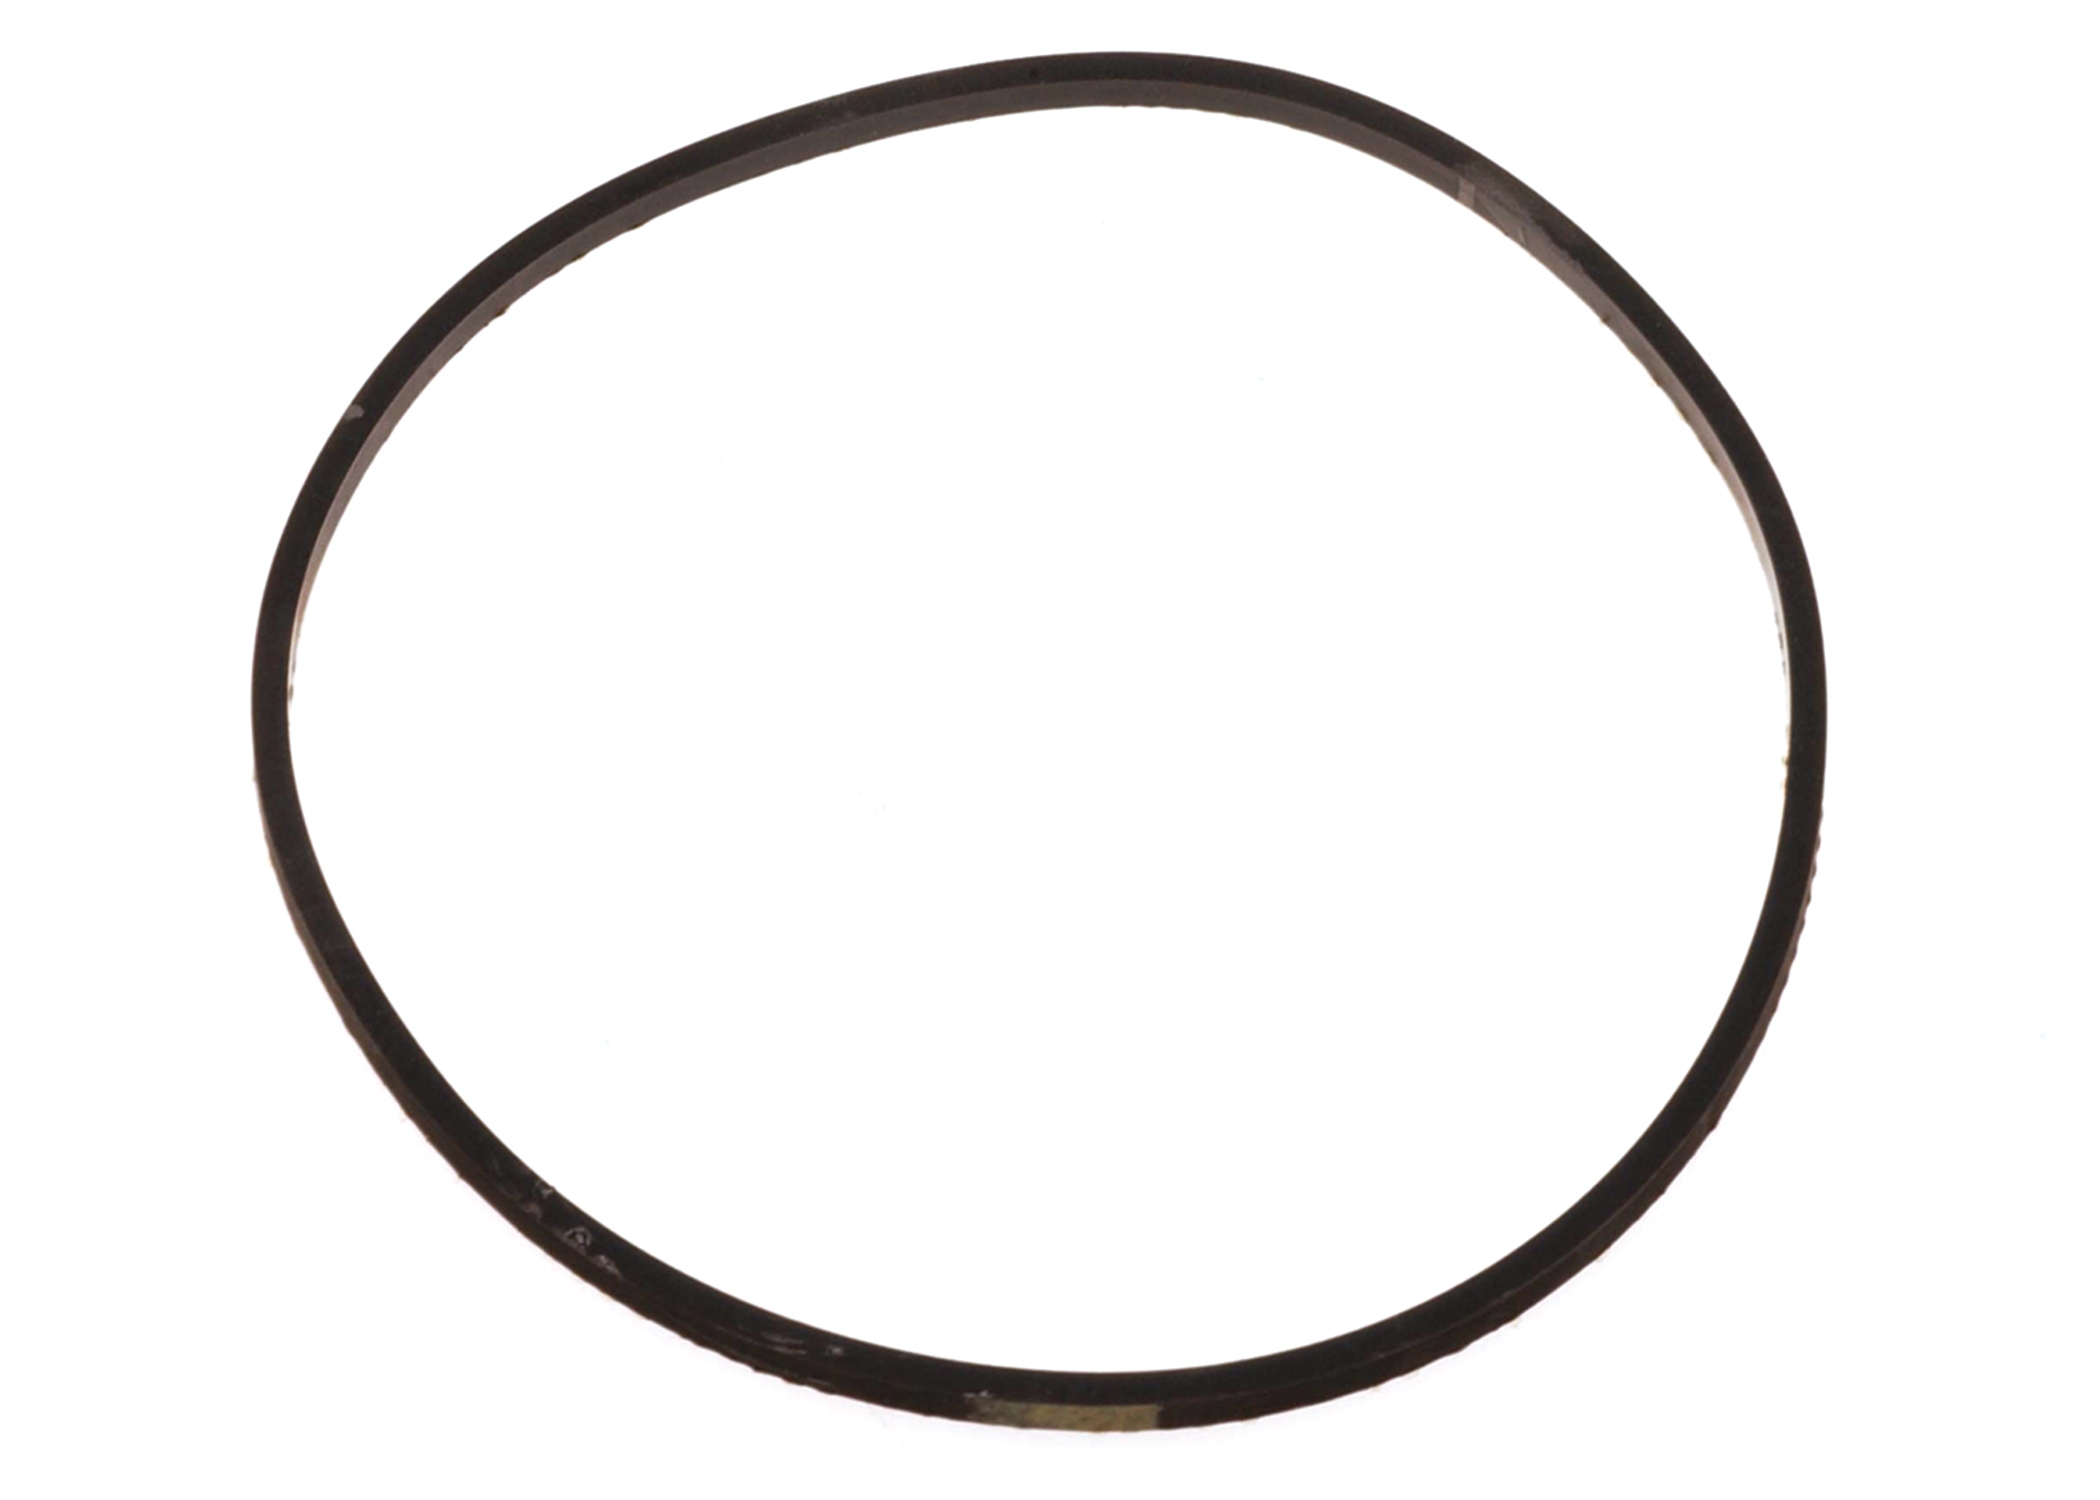 GM GENUINE PARTS CANADA - Automatic Transmission Valve Body Cover Gasket - GMC 24205119